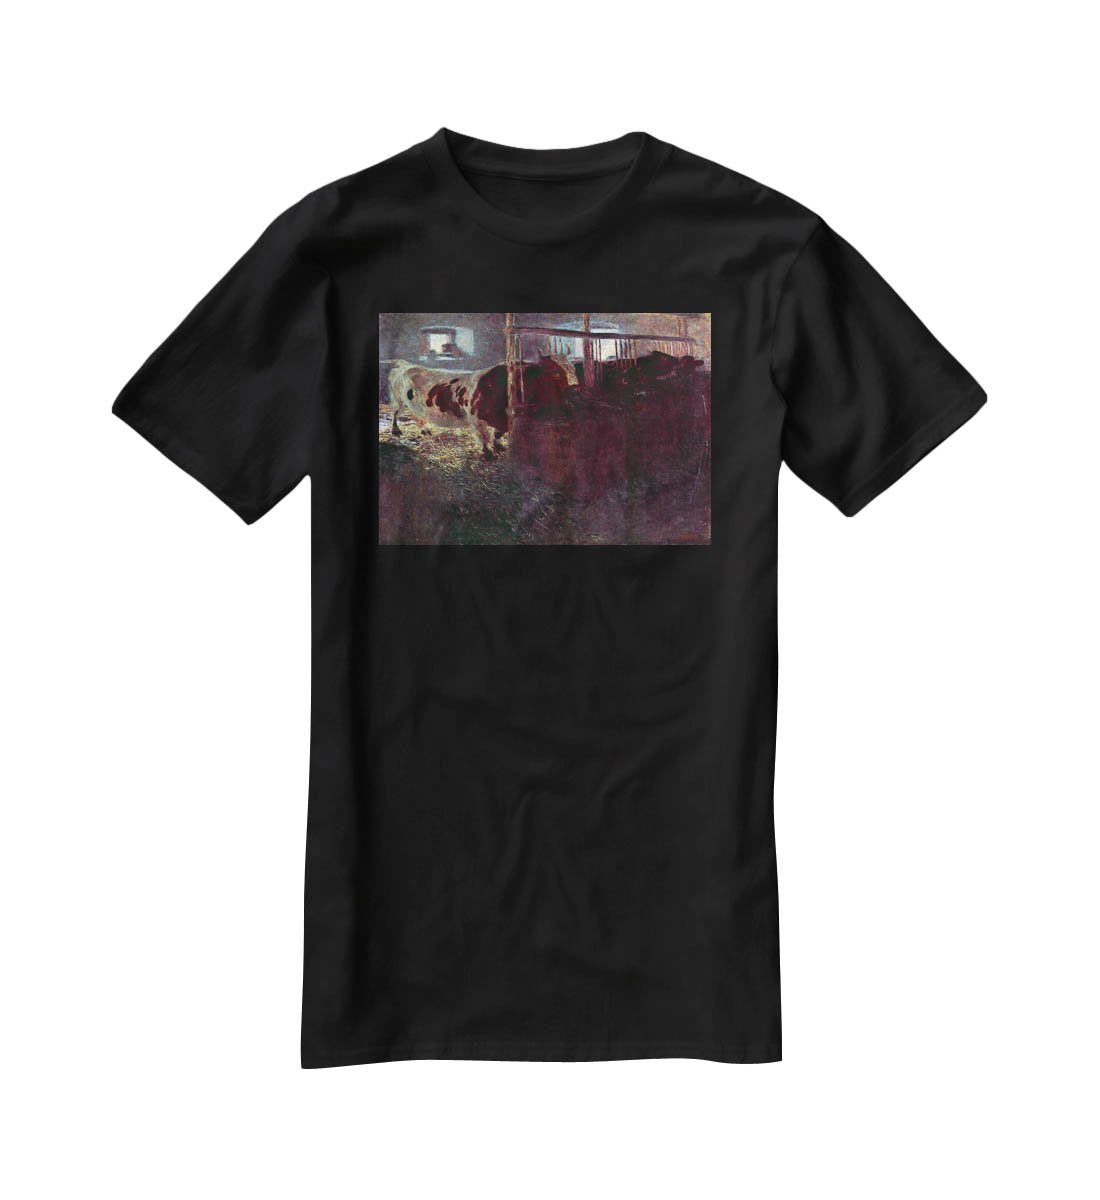 Cows in Stall by Klimt T-Shirt - Canvas Art Rocks - 1